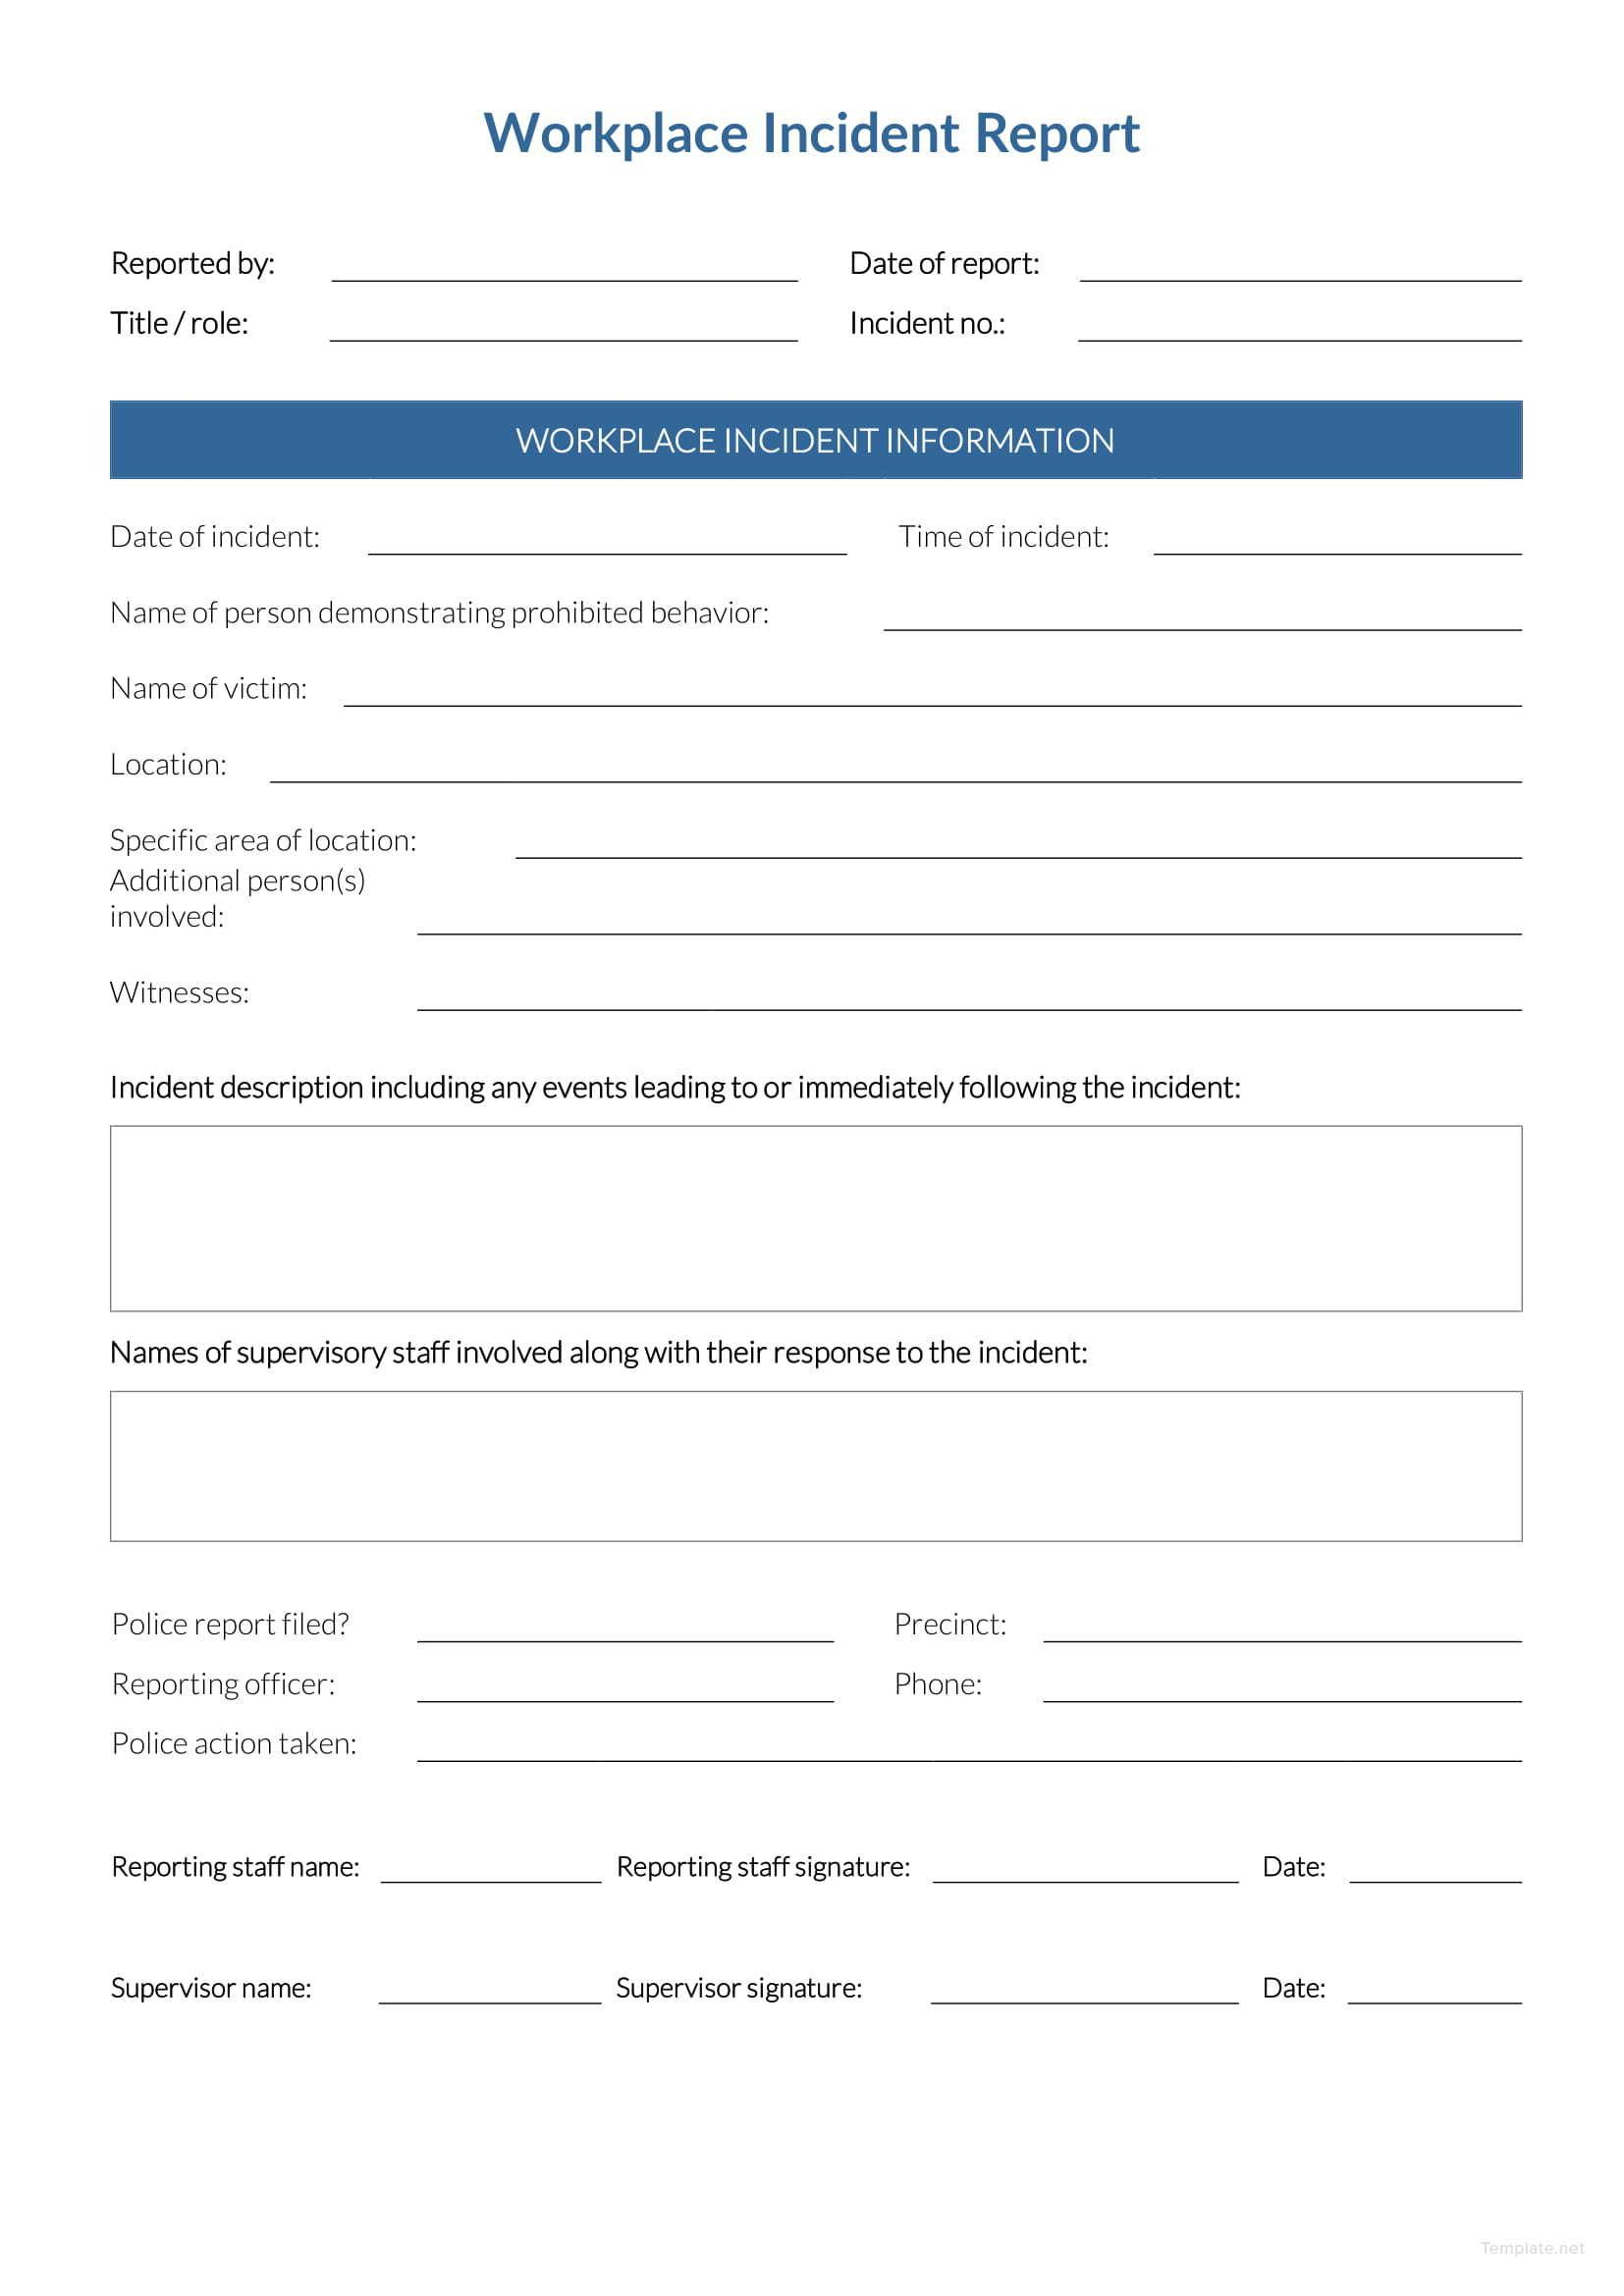 Free Workplace Incident Report | Data Form | Incident Report Inside Office Incident Report Template